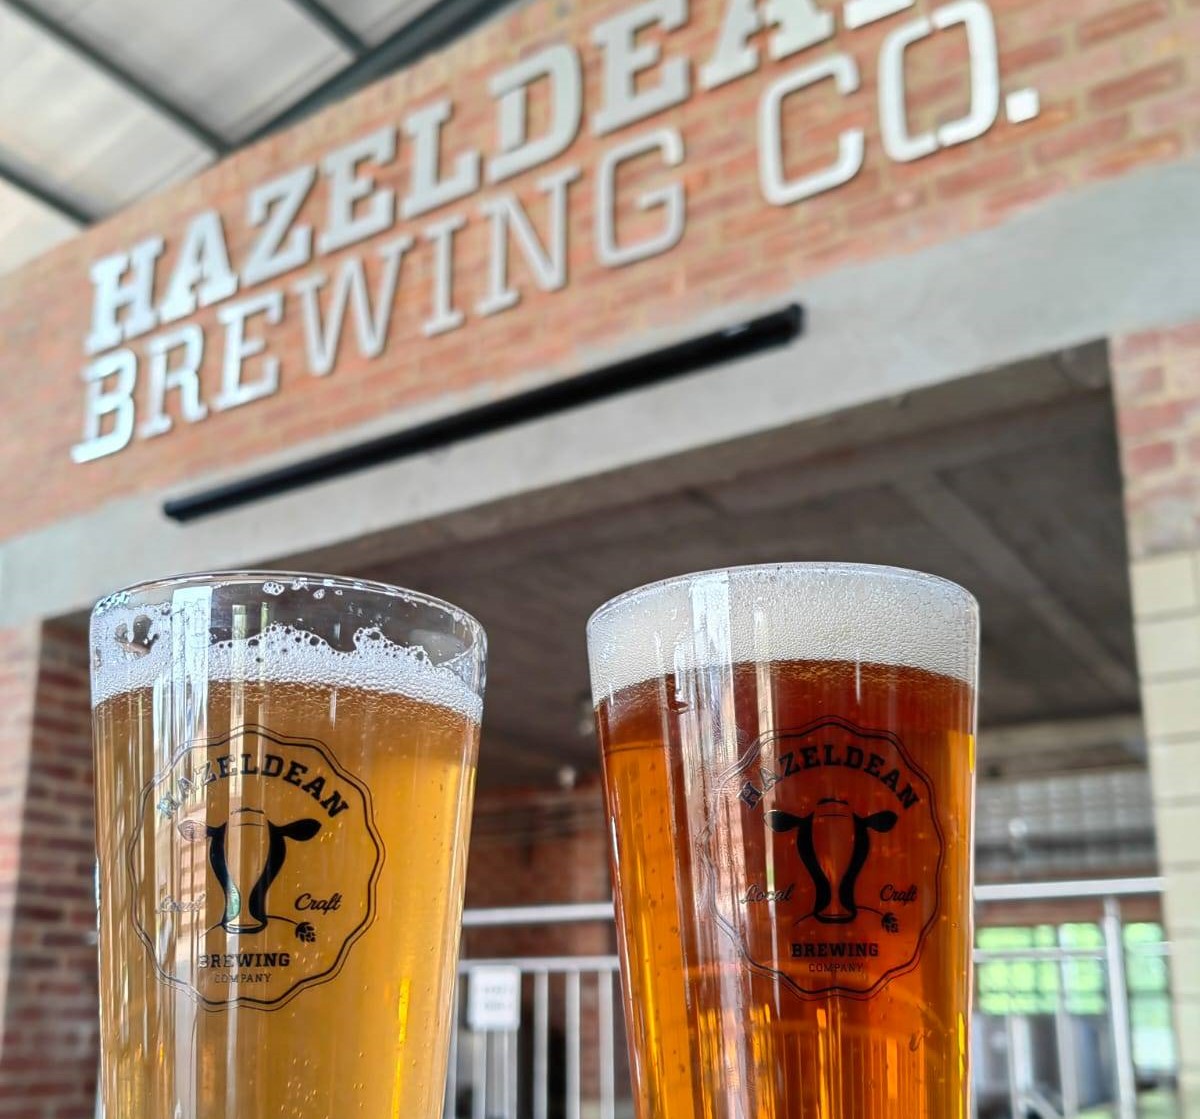 Experience award winning local craft beers at the Hazeldean Brewing Co Taproom